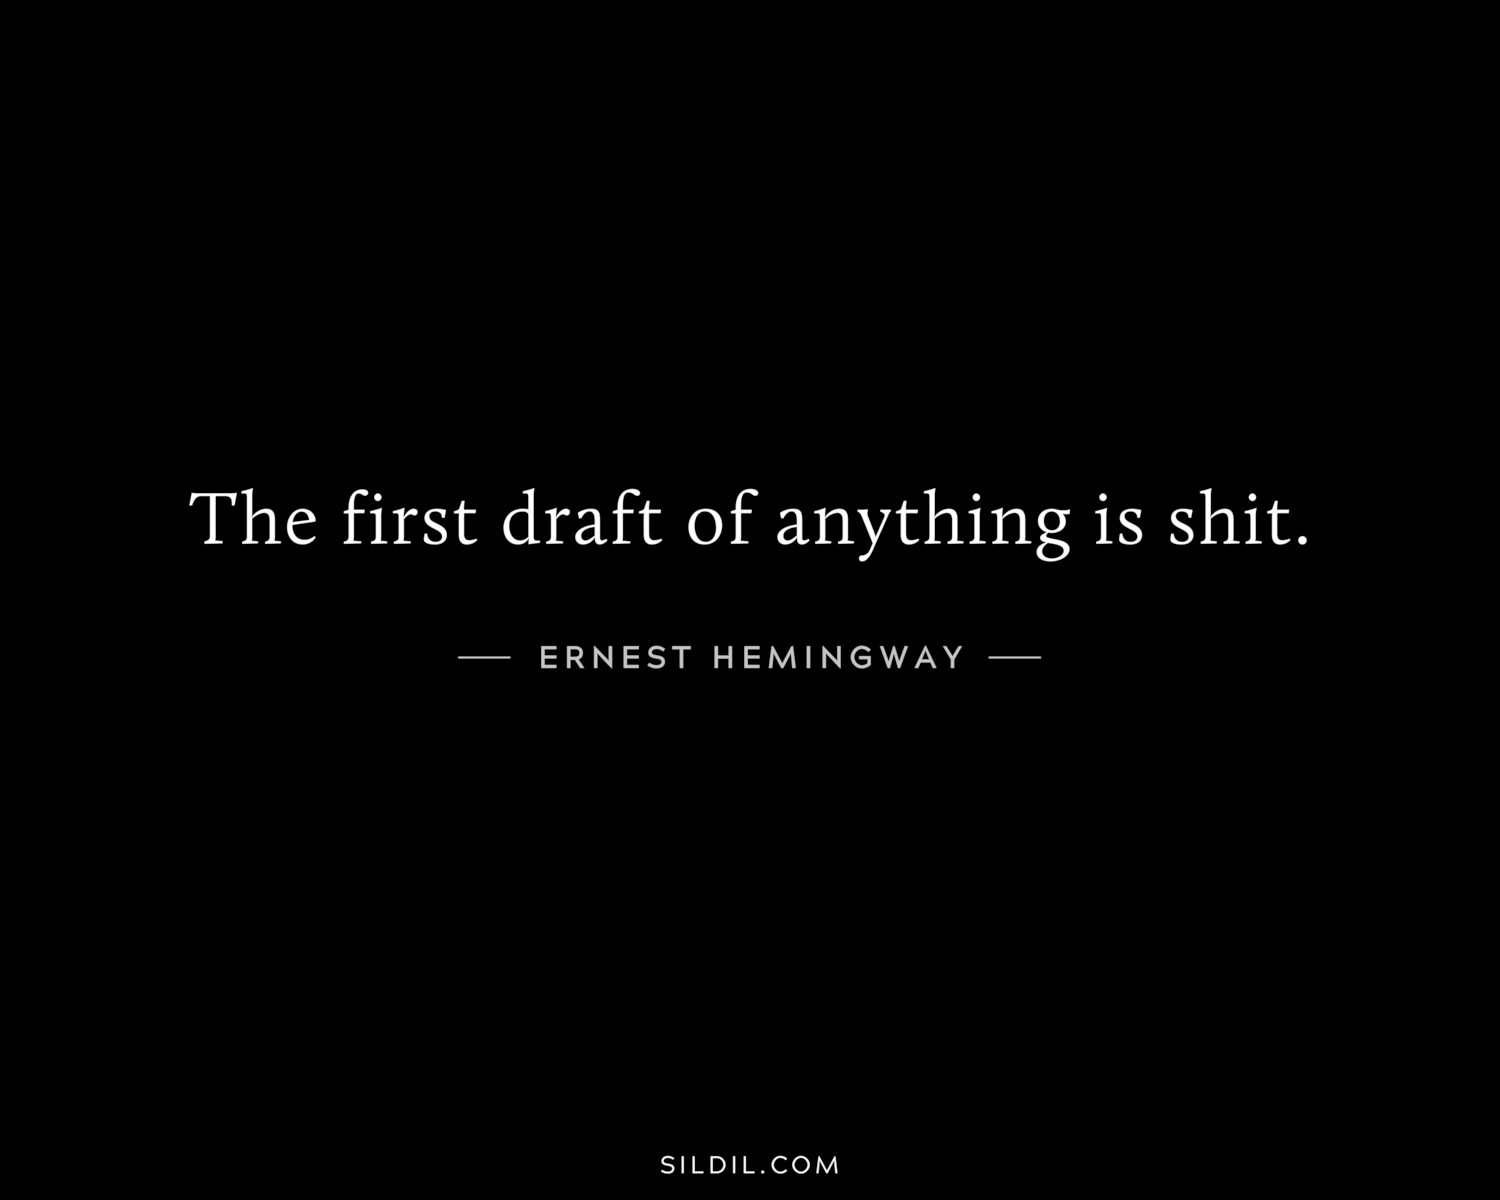 The first draft of anything is shit.